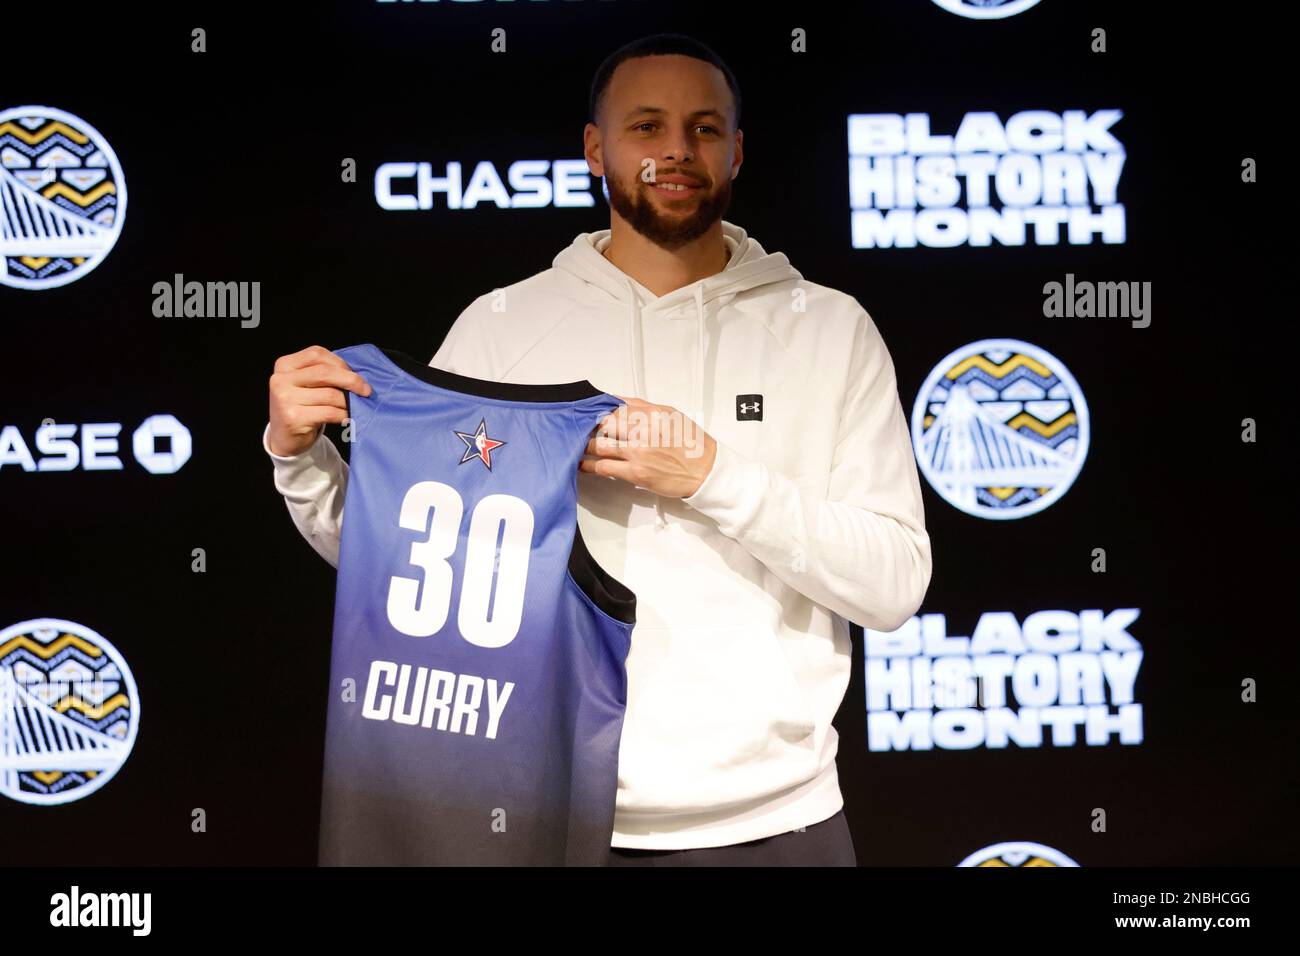 stephen curry all star jersey